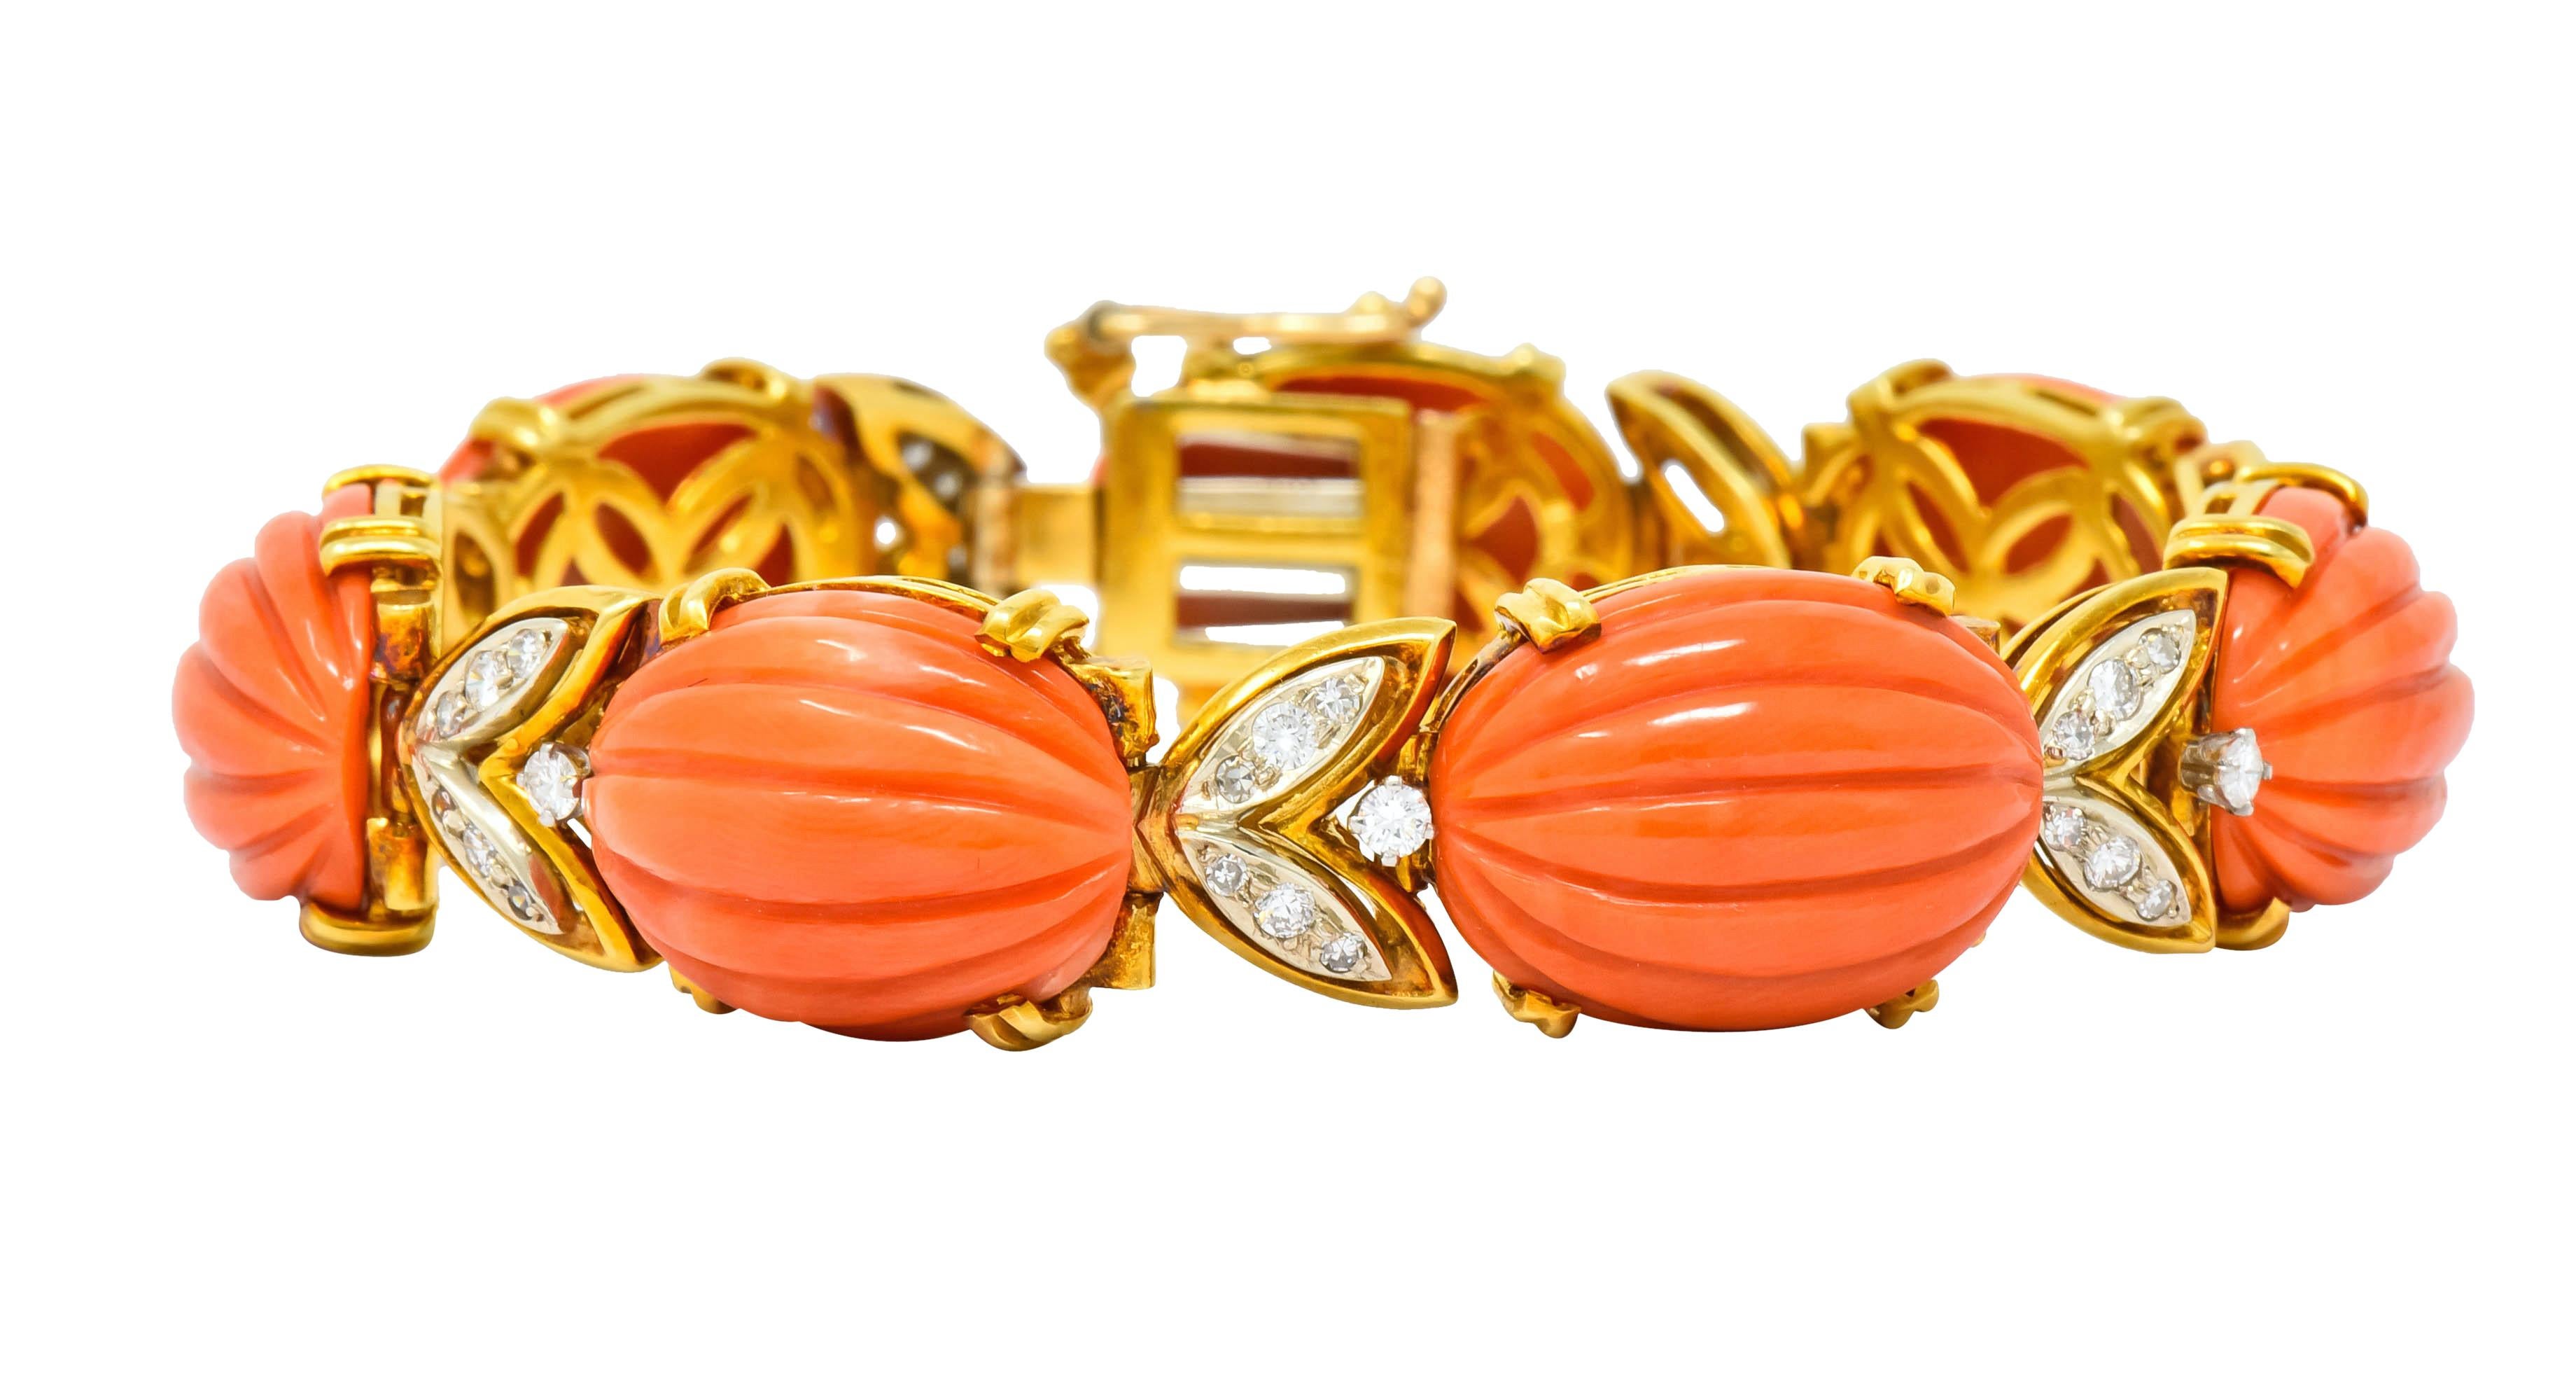 Bracelet comprised of oval coral cabochon links, deeply ridged and prong set, very well-matched orangey-pink in color

With platinum-topped foliate spacer links set with round brilliant cut and single cut diamonds weighing approximately 0.91 carat